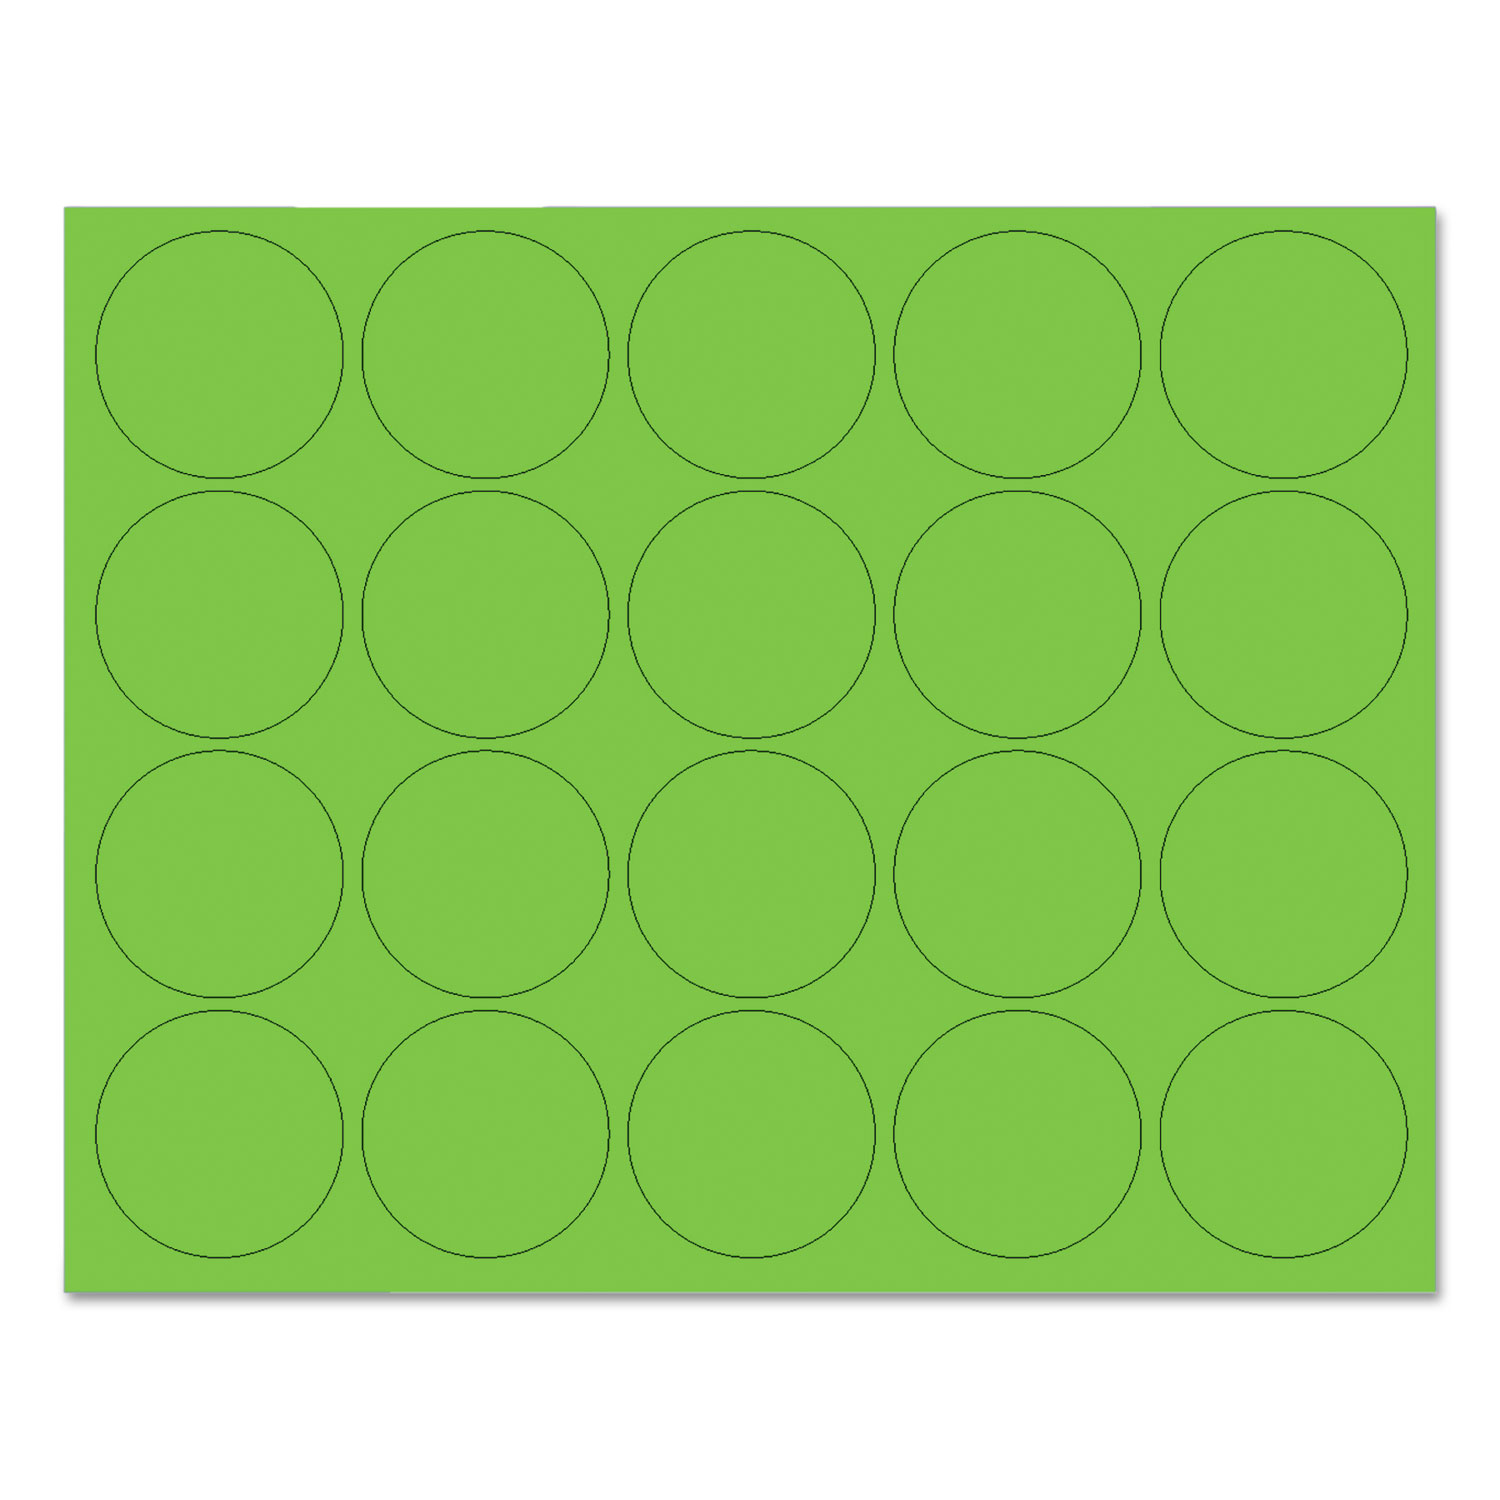  MasterVision FM1602 Interchangeable Magnetic Board Accessories, Circles, Green, 3/4, 20/Pack (BVCFM1602) 